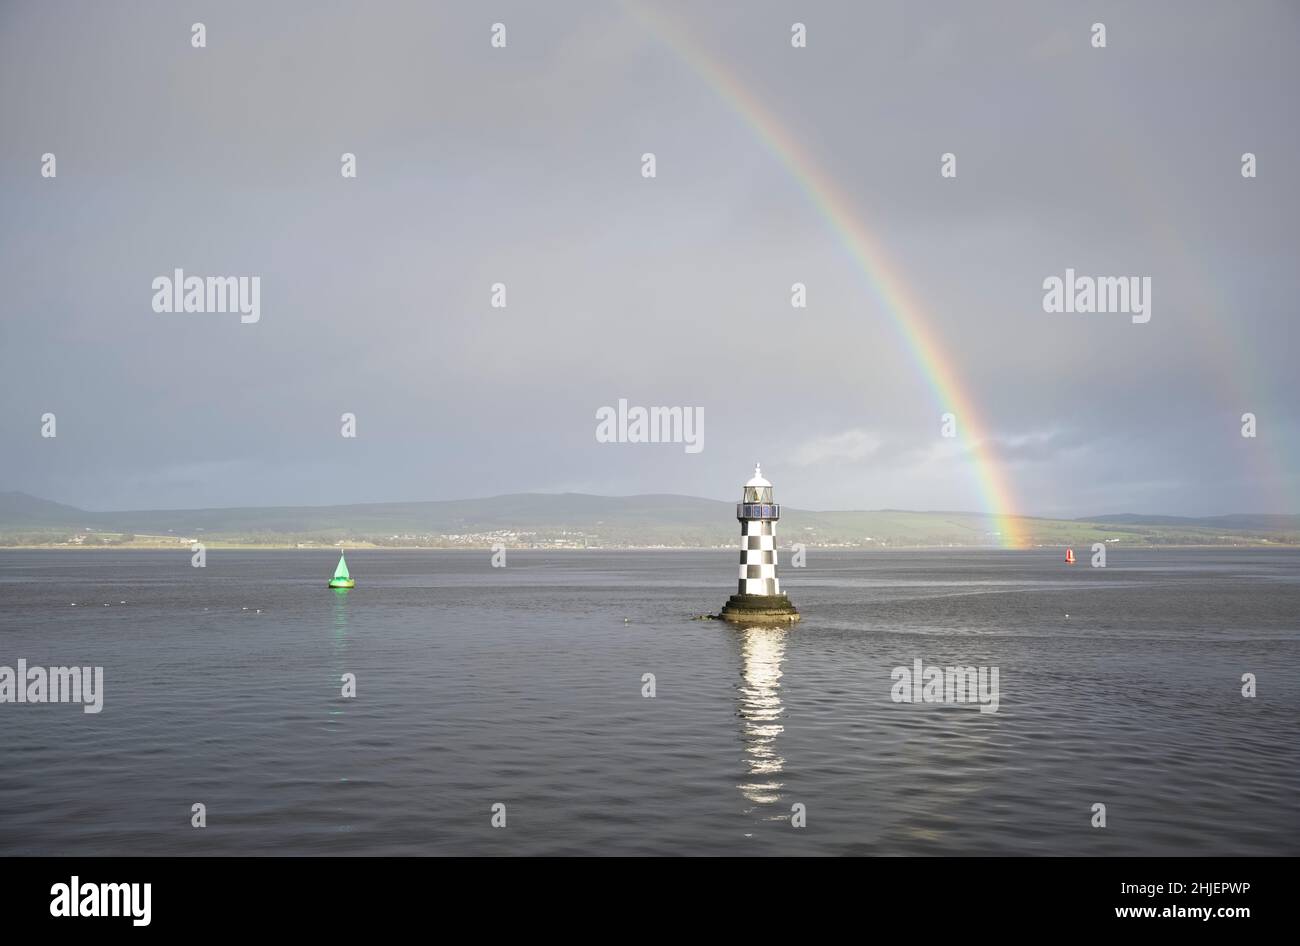 Bright rainbow high in sky over lighthouse in sea during dark storm Stock Photo